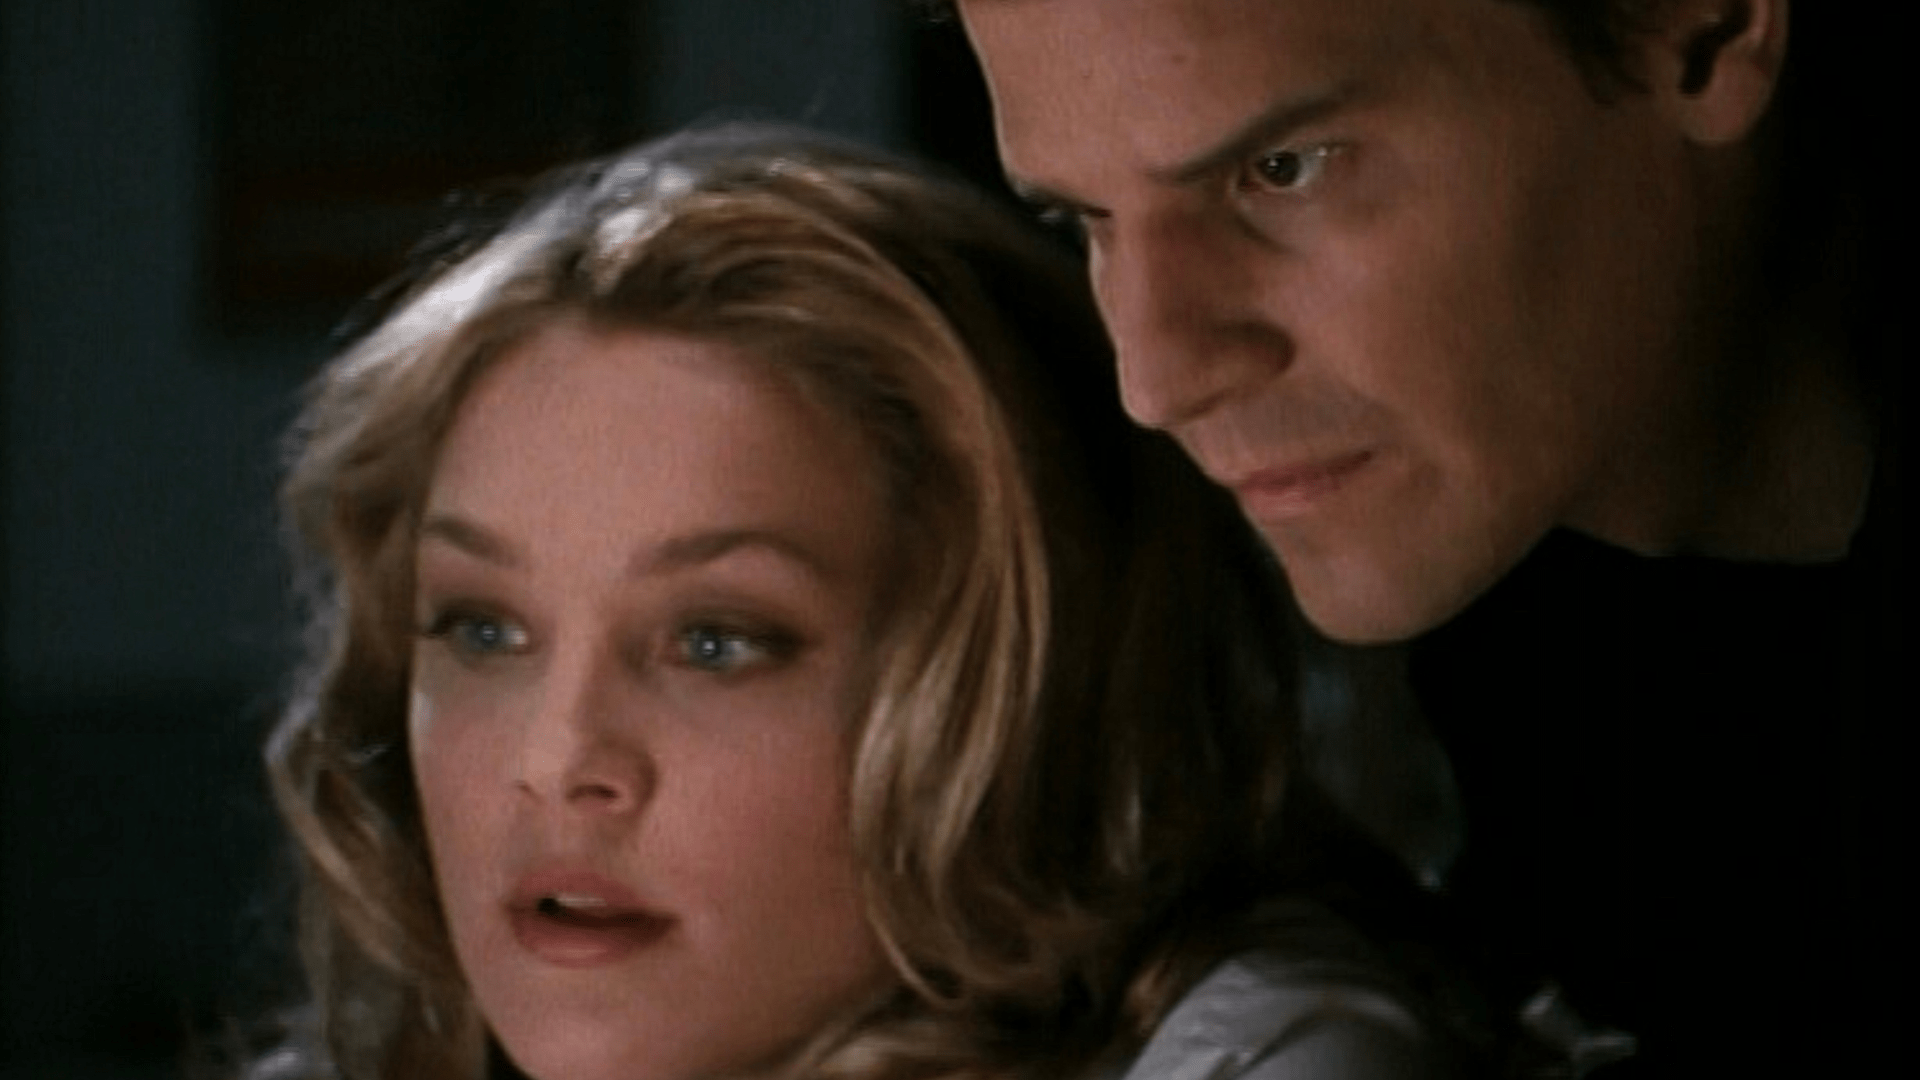 /television/corrupt-kate-the-too-dark-angel-episode-about-prostitution-that-never-aired